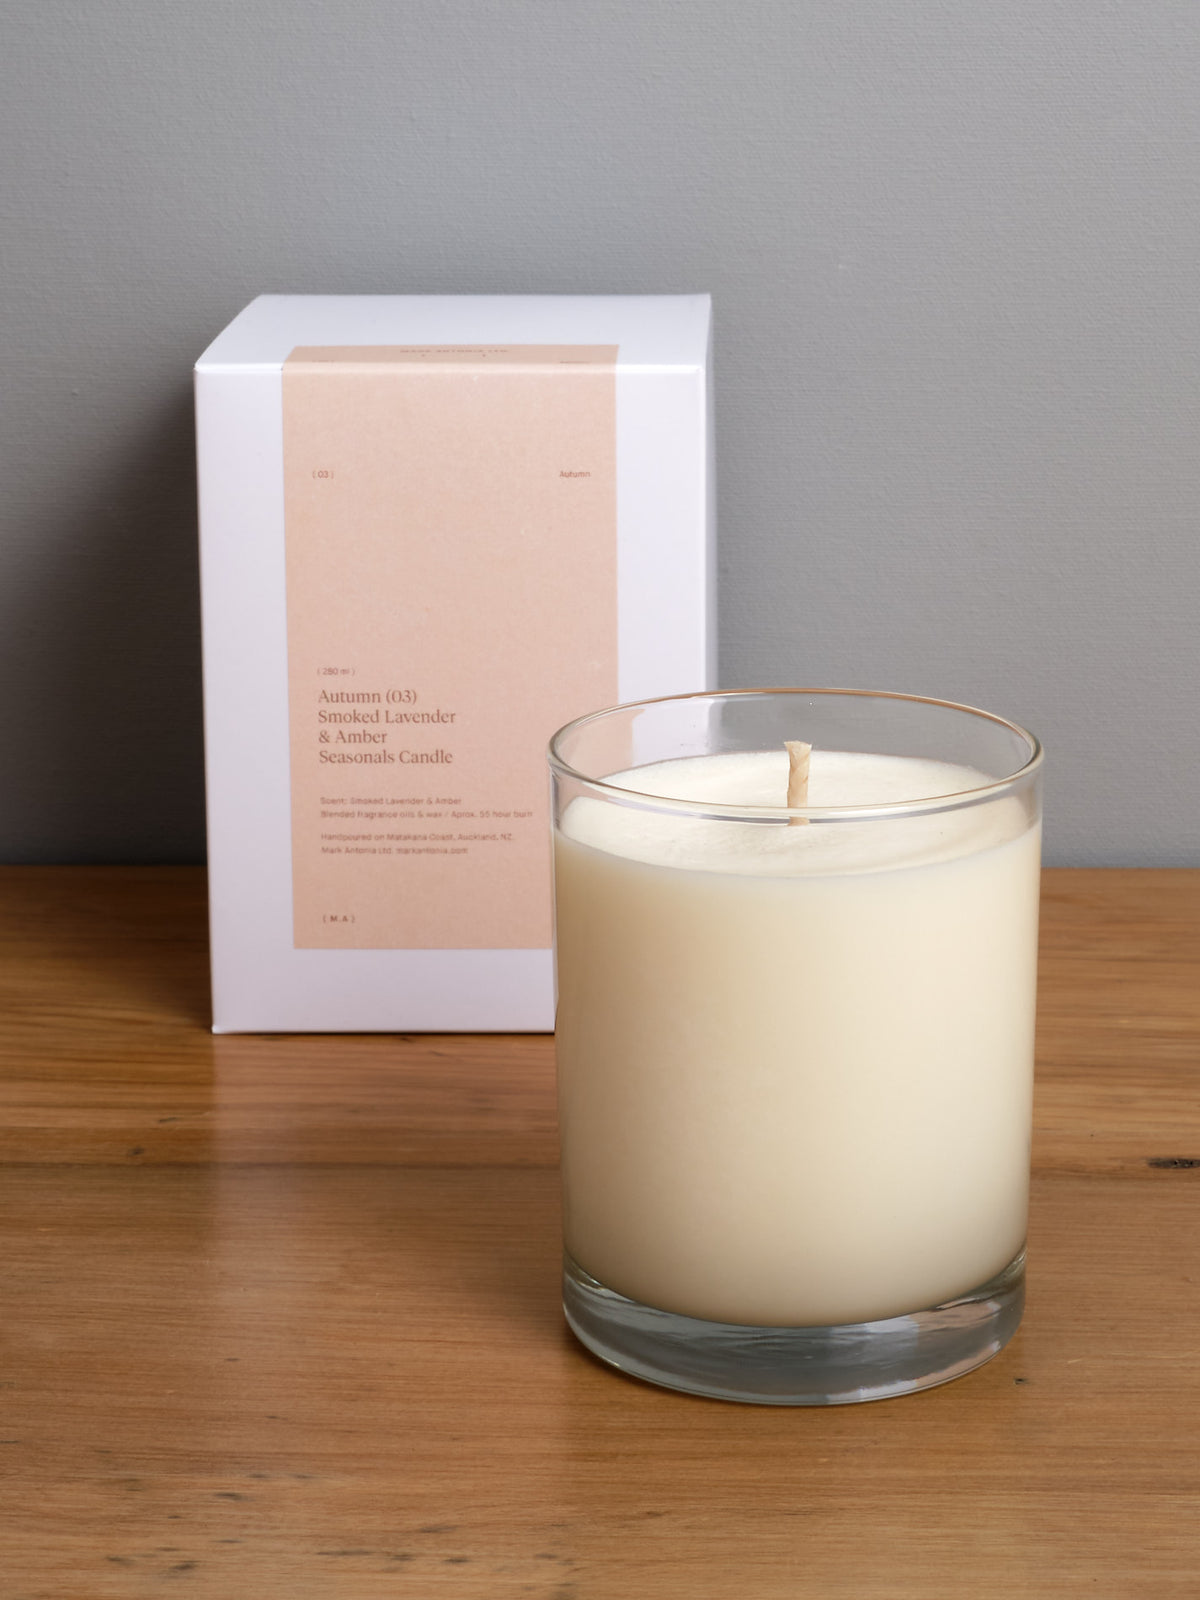 A Mark Antonia Seasonal Candle (2.0) – Autumn sitting on a wooden table next to a box.